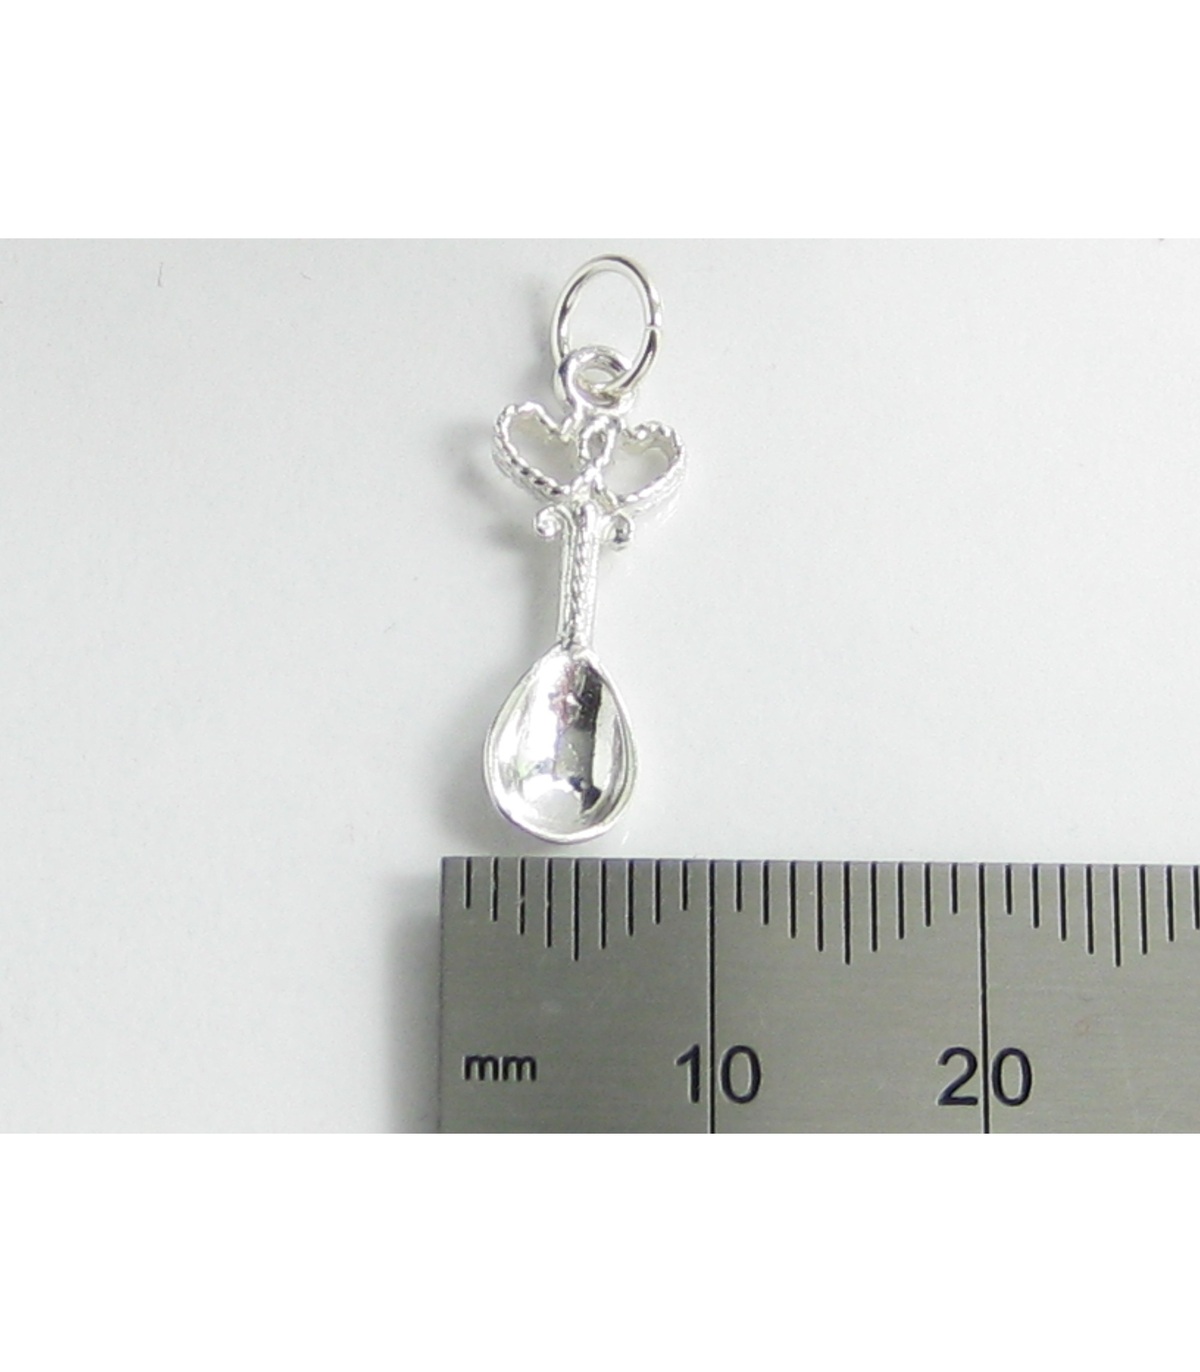 welsh love spoon sterling silver charm 925 x 1 loving spoons charms